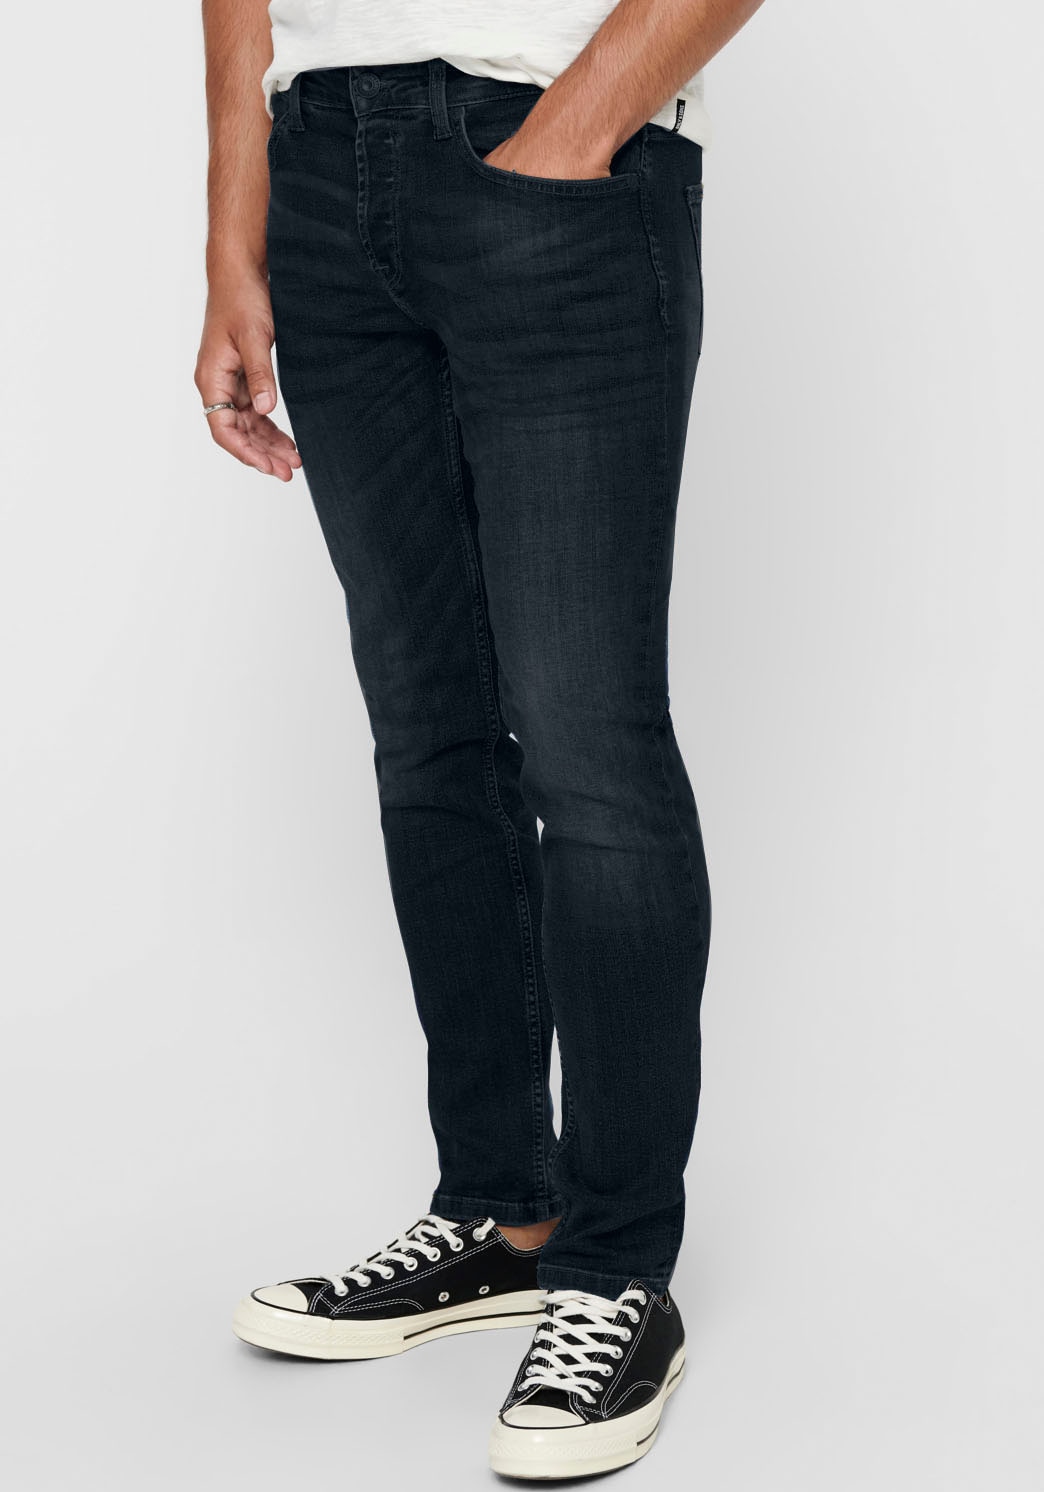 ONLY & SONS Slim-fit-Jeans »ONSWEFT REG. D. GREY 6458 JEANS VD« von Only & Sons